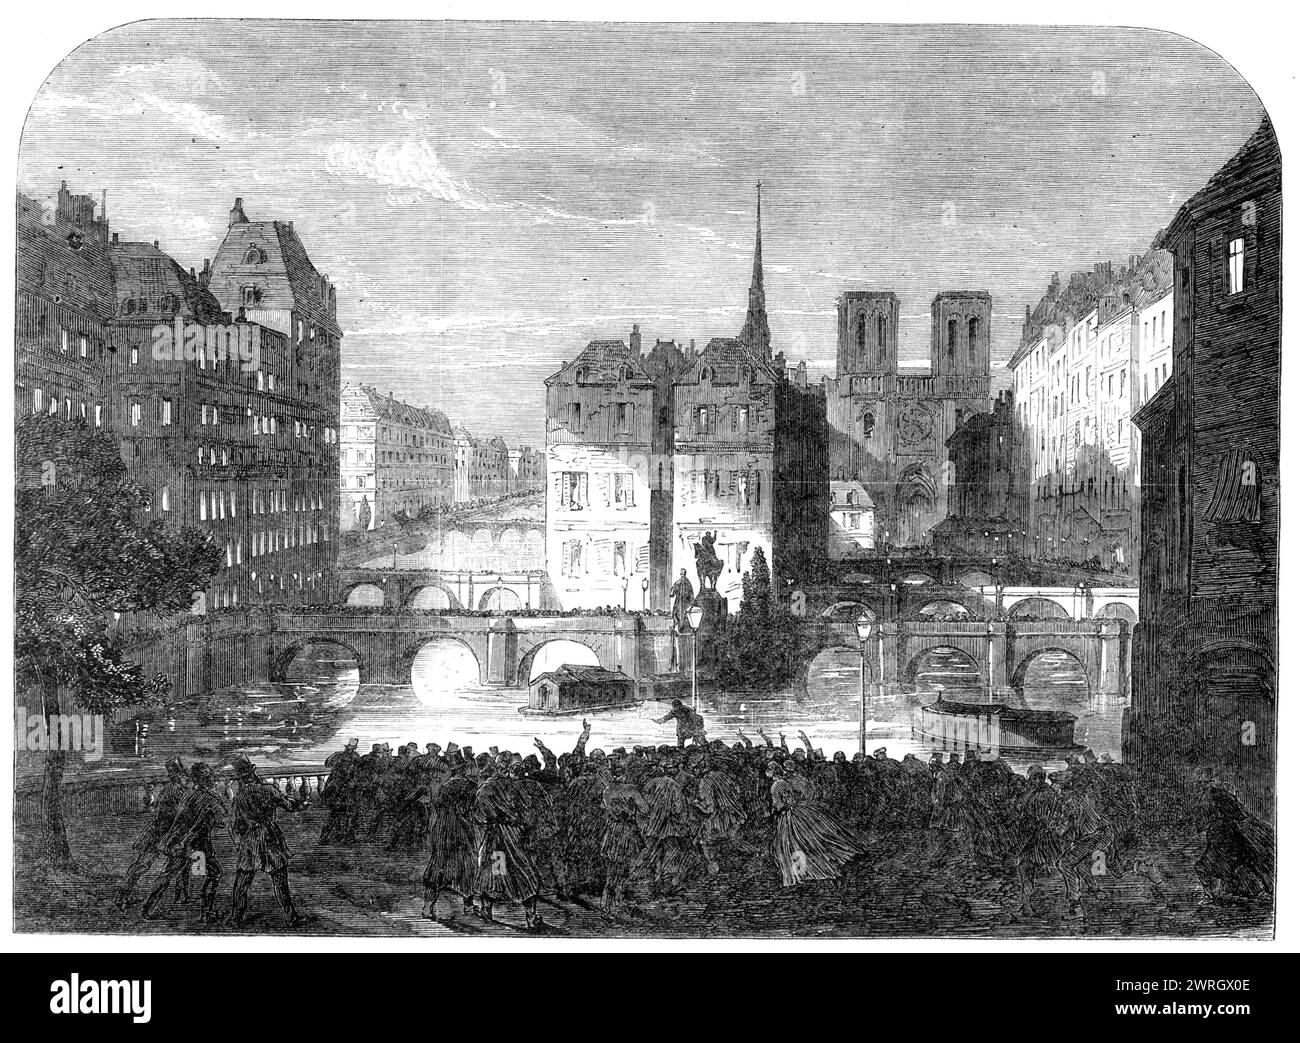 Scene from &quot;The Workmen of Paris&quot;, at the Adelphi Theatre; Paris by Moonlight, 1864. London stage production. 'There are two novel and elaborate scenic effects, which greatly add to the attractions of the play. One of them...is a view of Paris by moonlight, taking in the Pont Neuf and the Cit&#xe9;, with the towers of Notre Dame in the background. The reality of this picture is heightened by the introduction of lighted lamps and similar appliances, producing a spectacle which in its kind has not been surpassed...Mr. Gates is the painter of this scene... The dramatic interest of the p Stock Photo